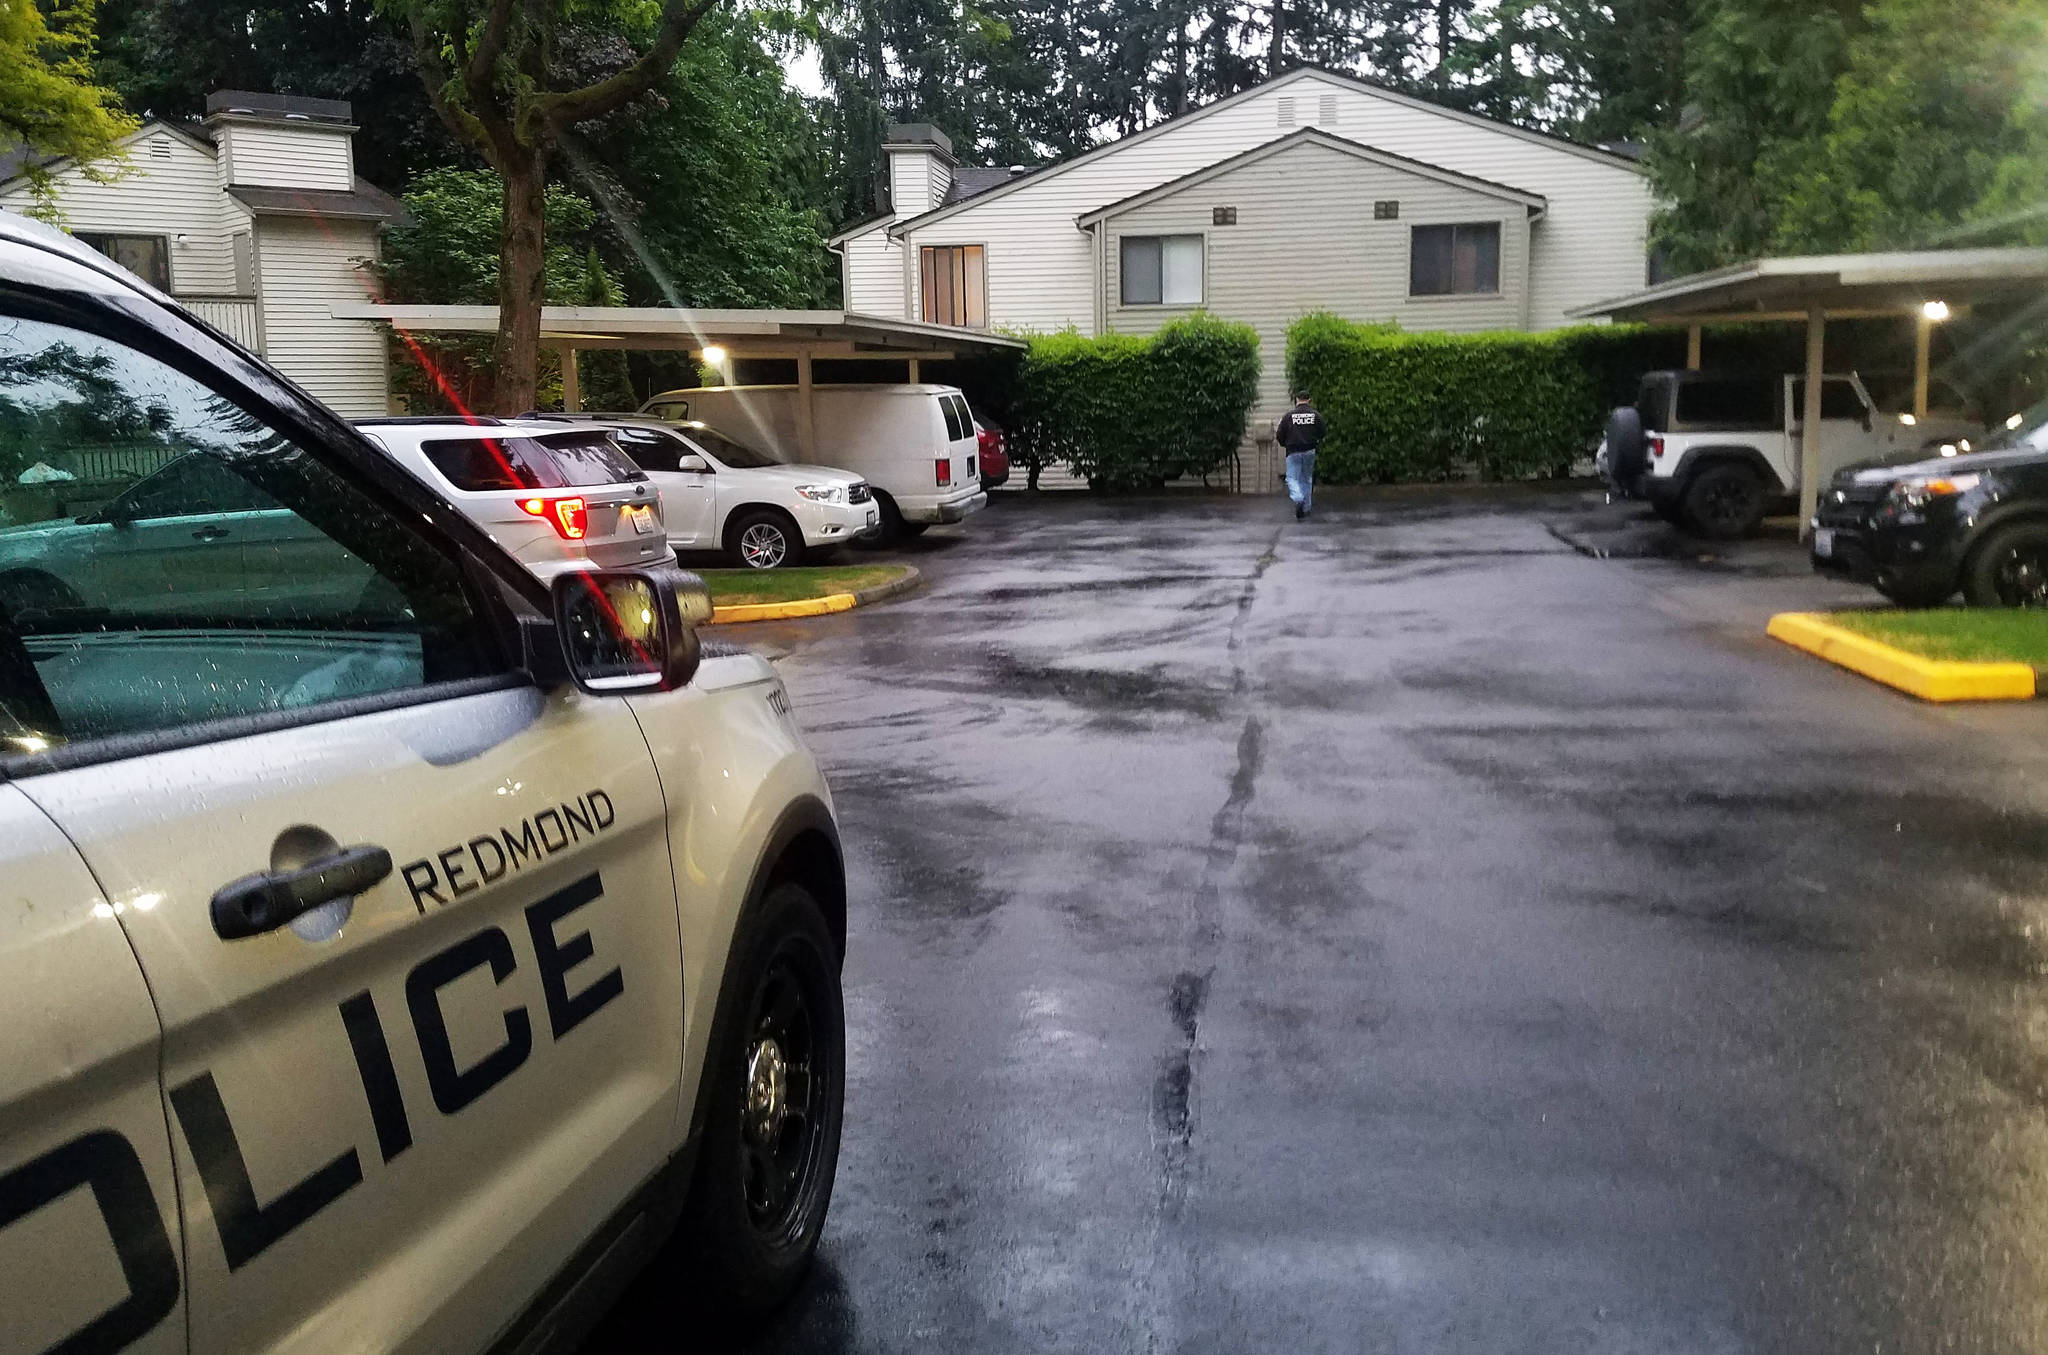 Detectives at the apartment where a 59-year-old Redmond resident was found dead, after an autopsy revealed a gunshot wound to the head, Saturday, May 16. Photo courtesy of Redmond Police Department.